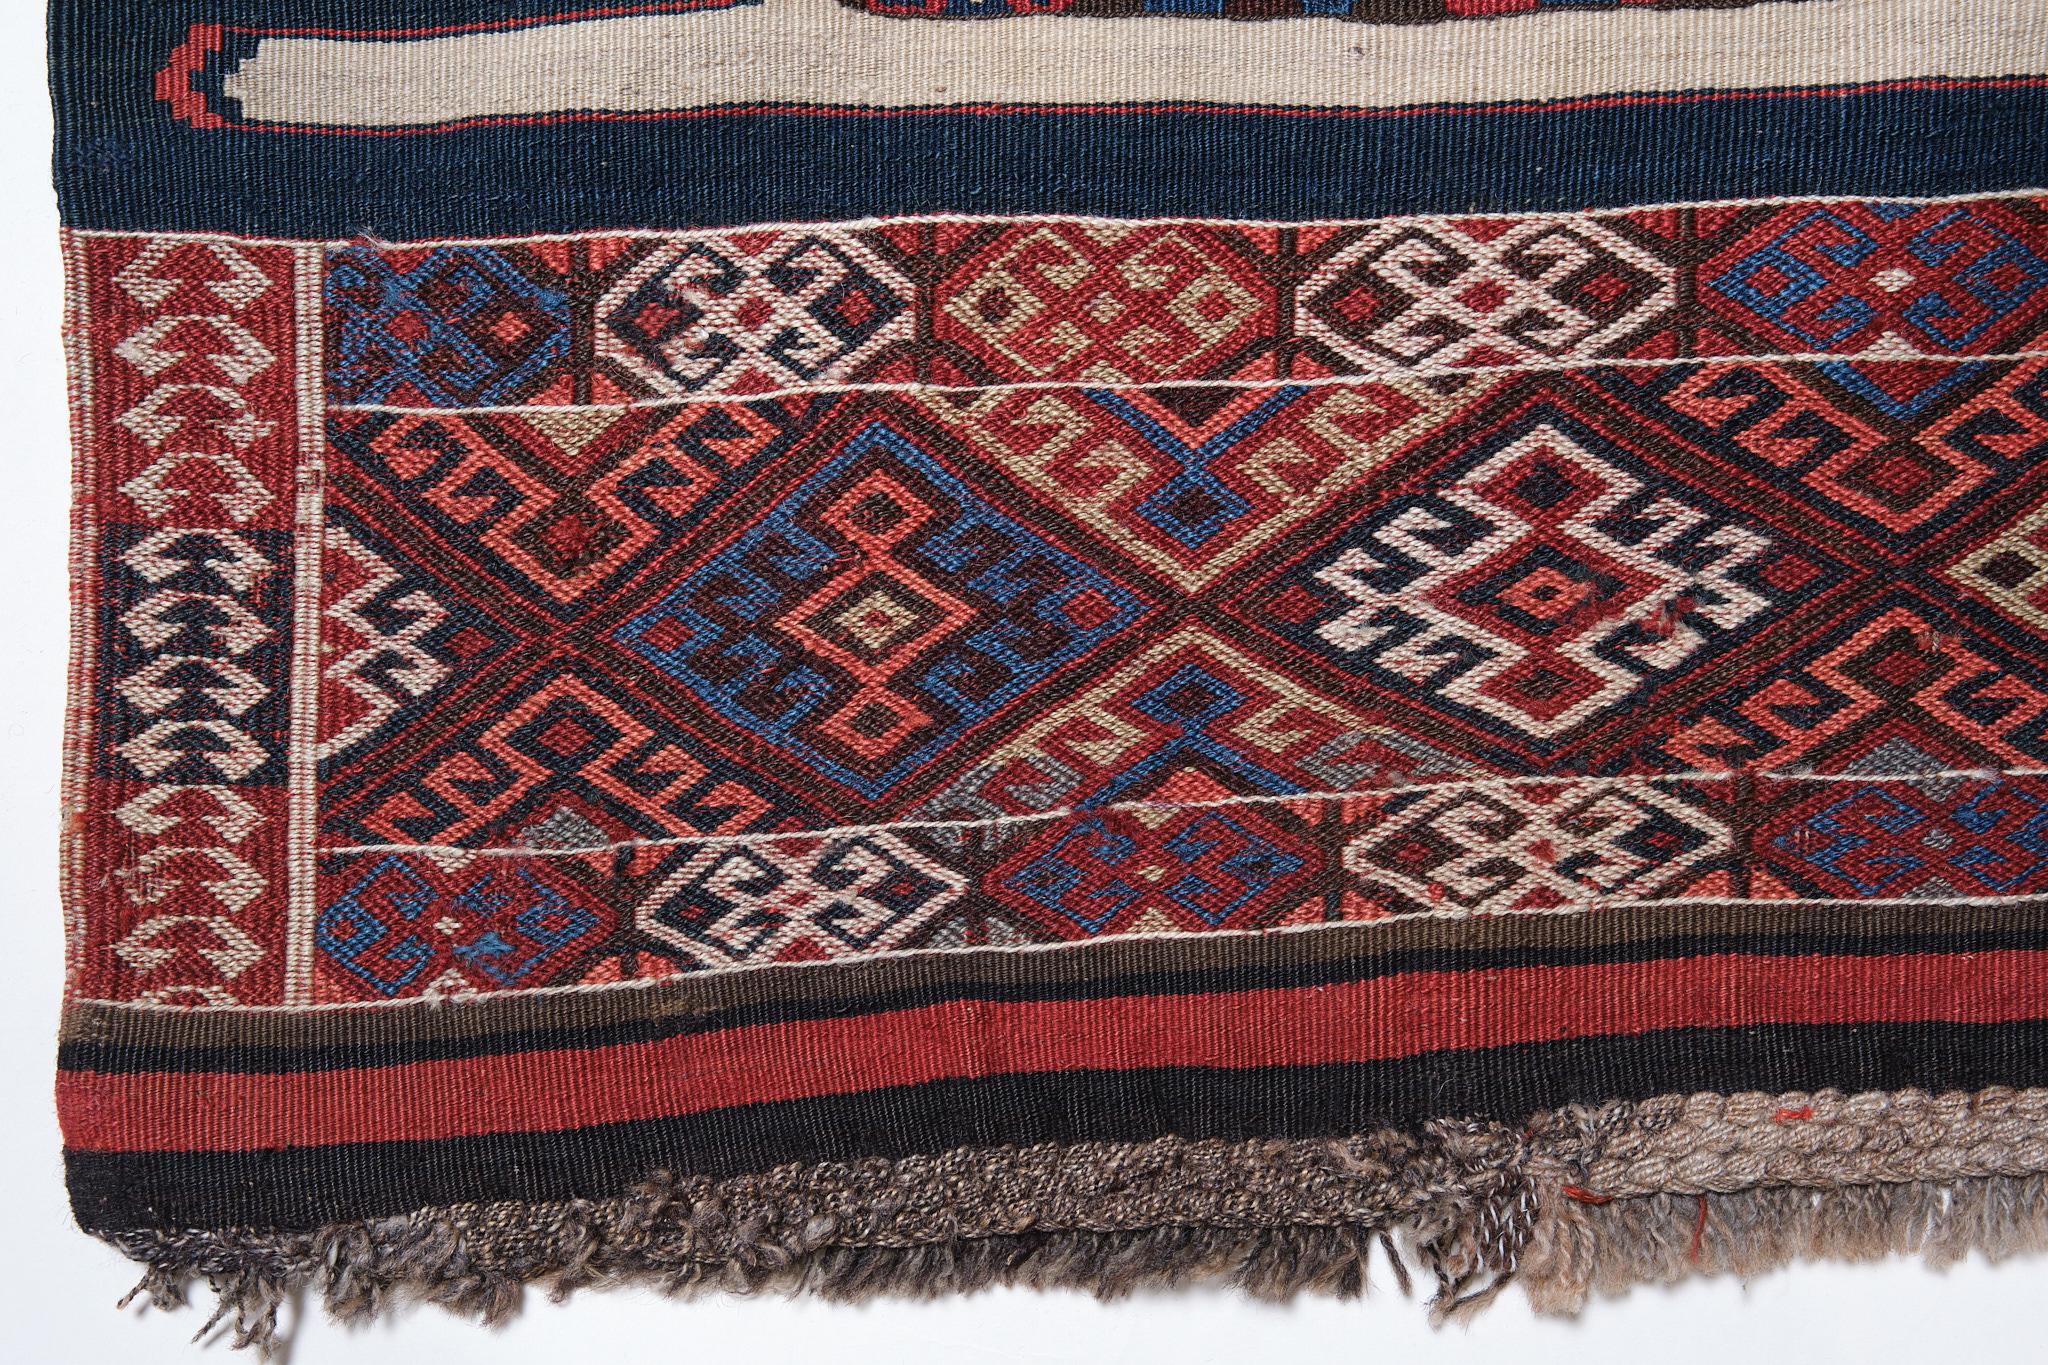 This is a Southern Anatolian Antique Kilim from the Malatya region with a rare and beautiful color composition.

This kilim is listed in the book; Kilims Flat-woven Tapestry Rugs, Yanni Petsopoulos, 1979 Rizzoli New York, plate nr. 241. 
The